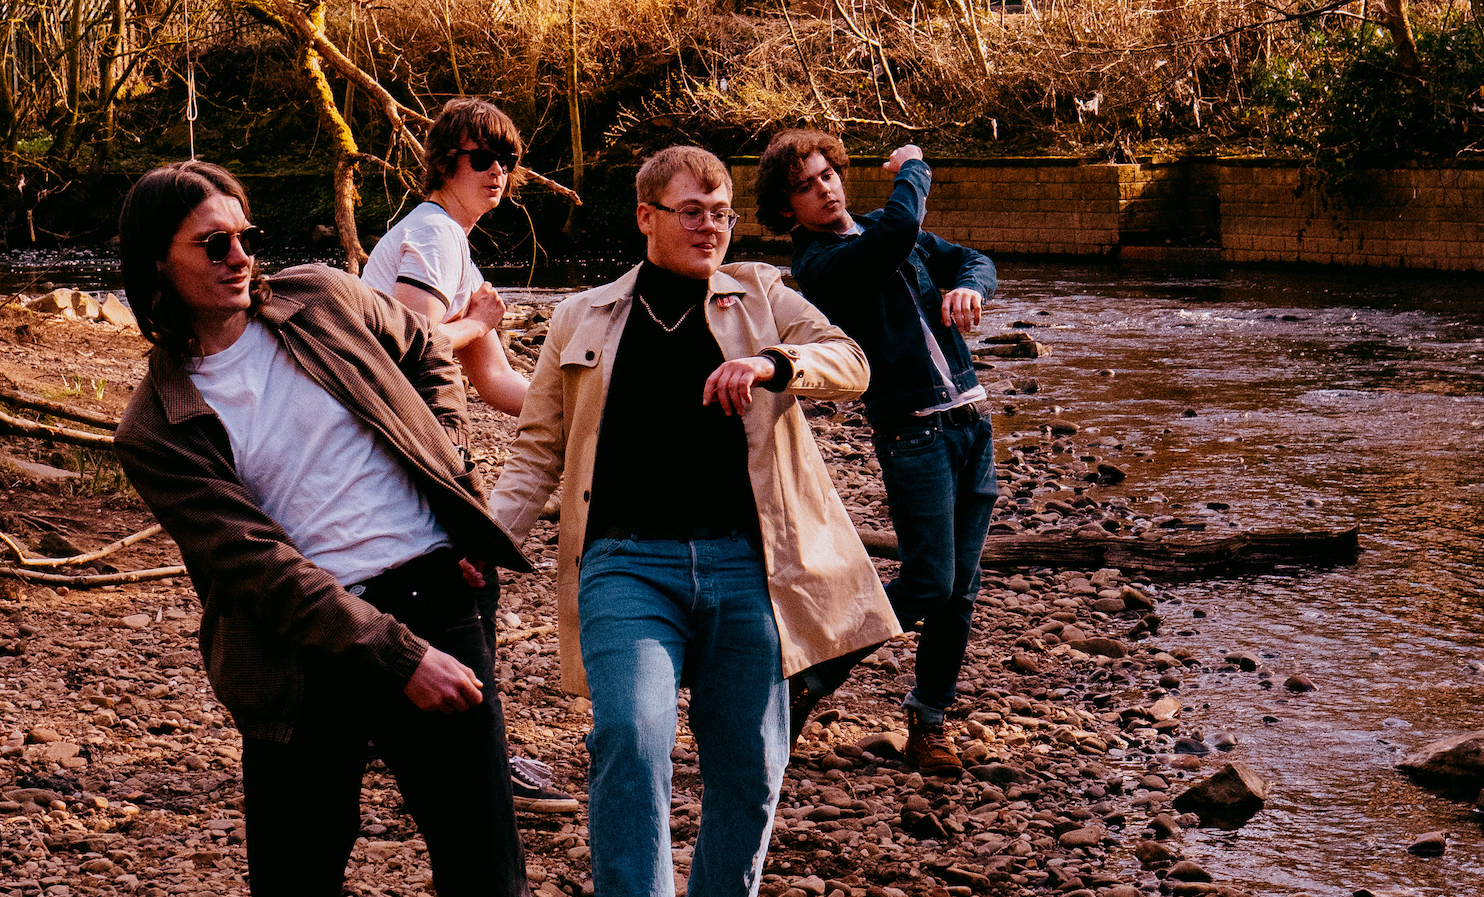 UK INDIE ROCK STANDOUTS THE LATHUMS SET FOR US DEBUT THIS WEEK